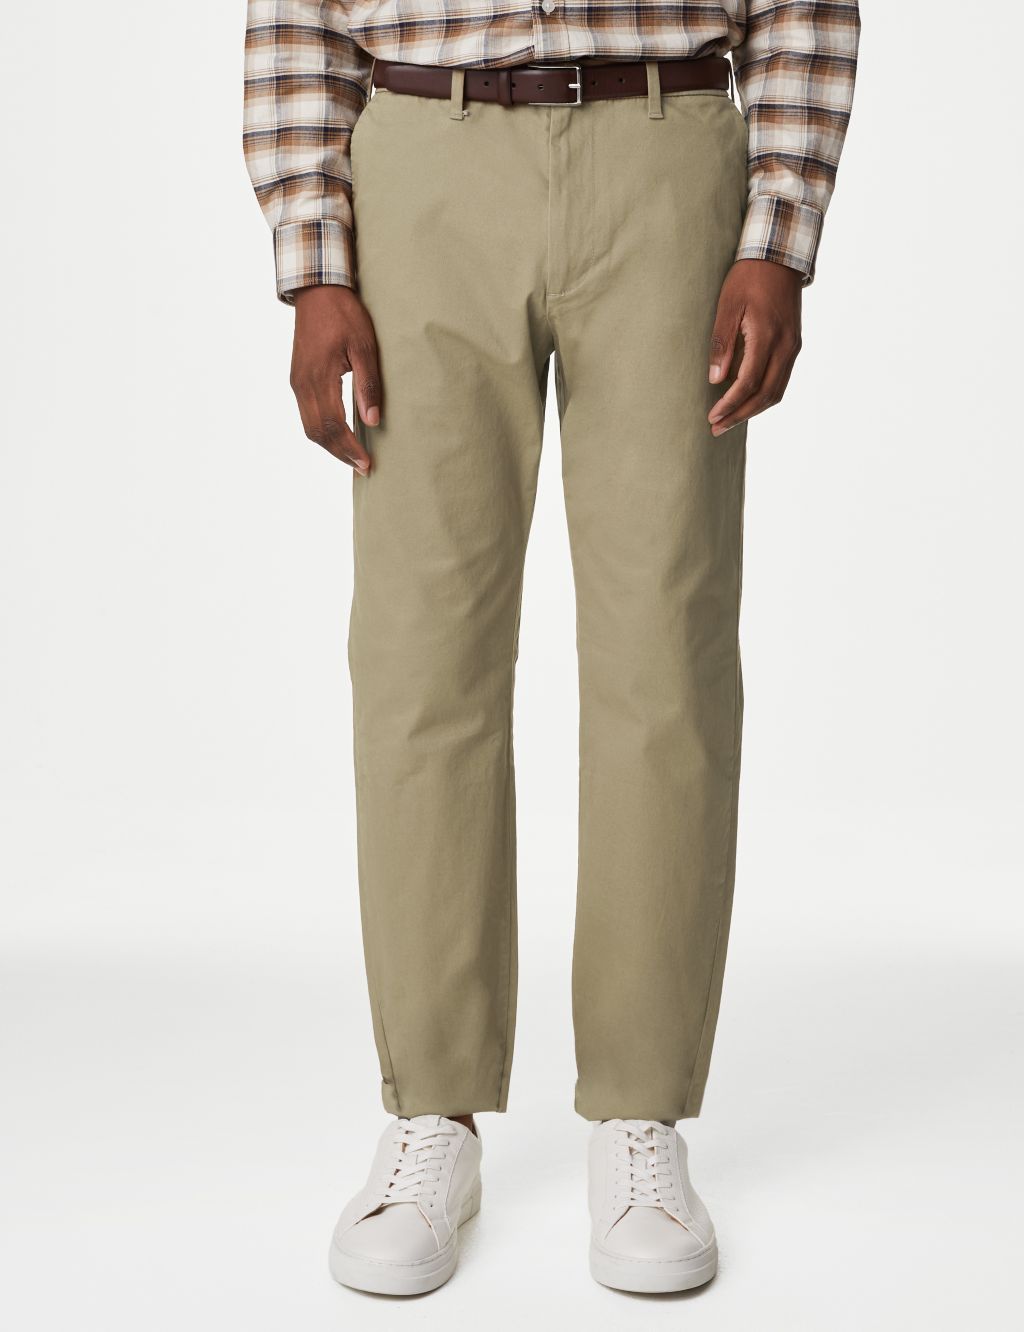 Tapered Fit Stretch Chinos image 1